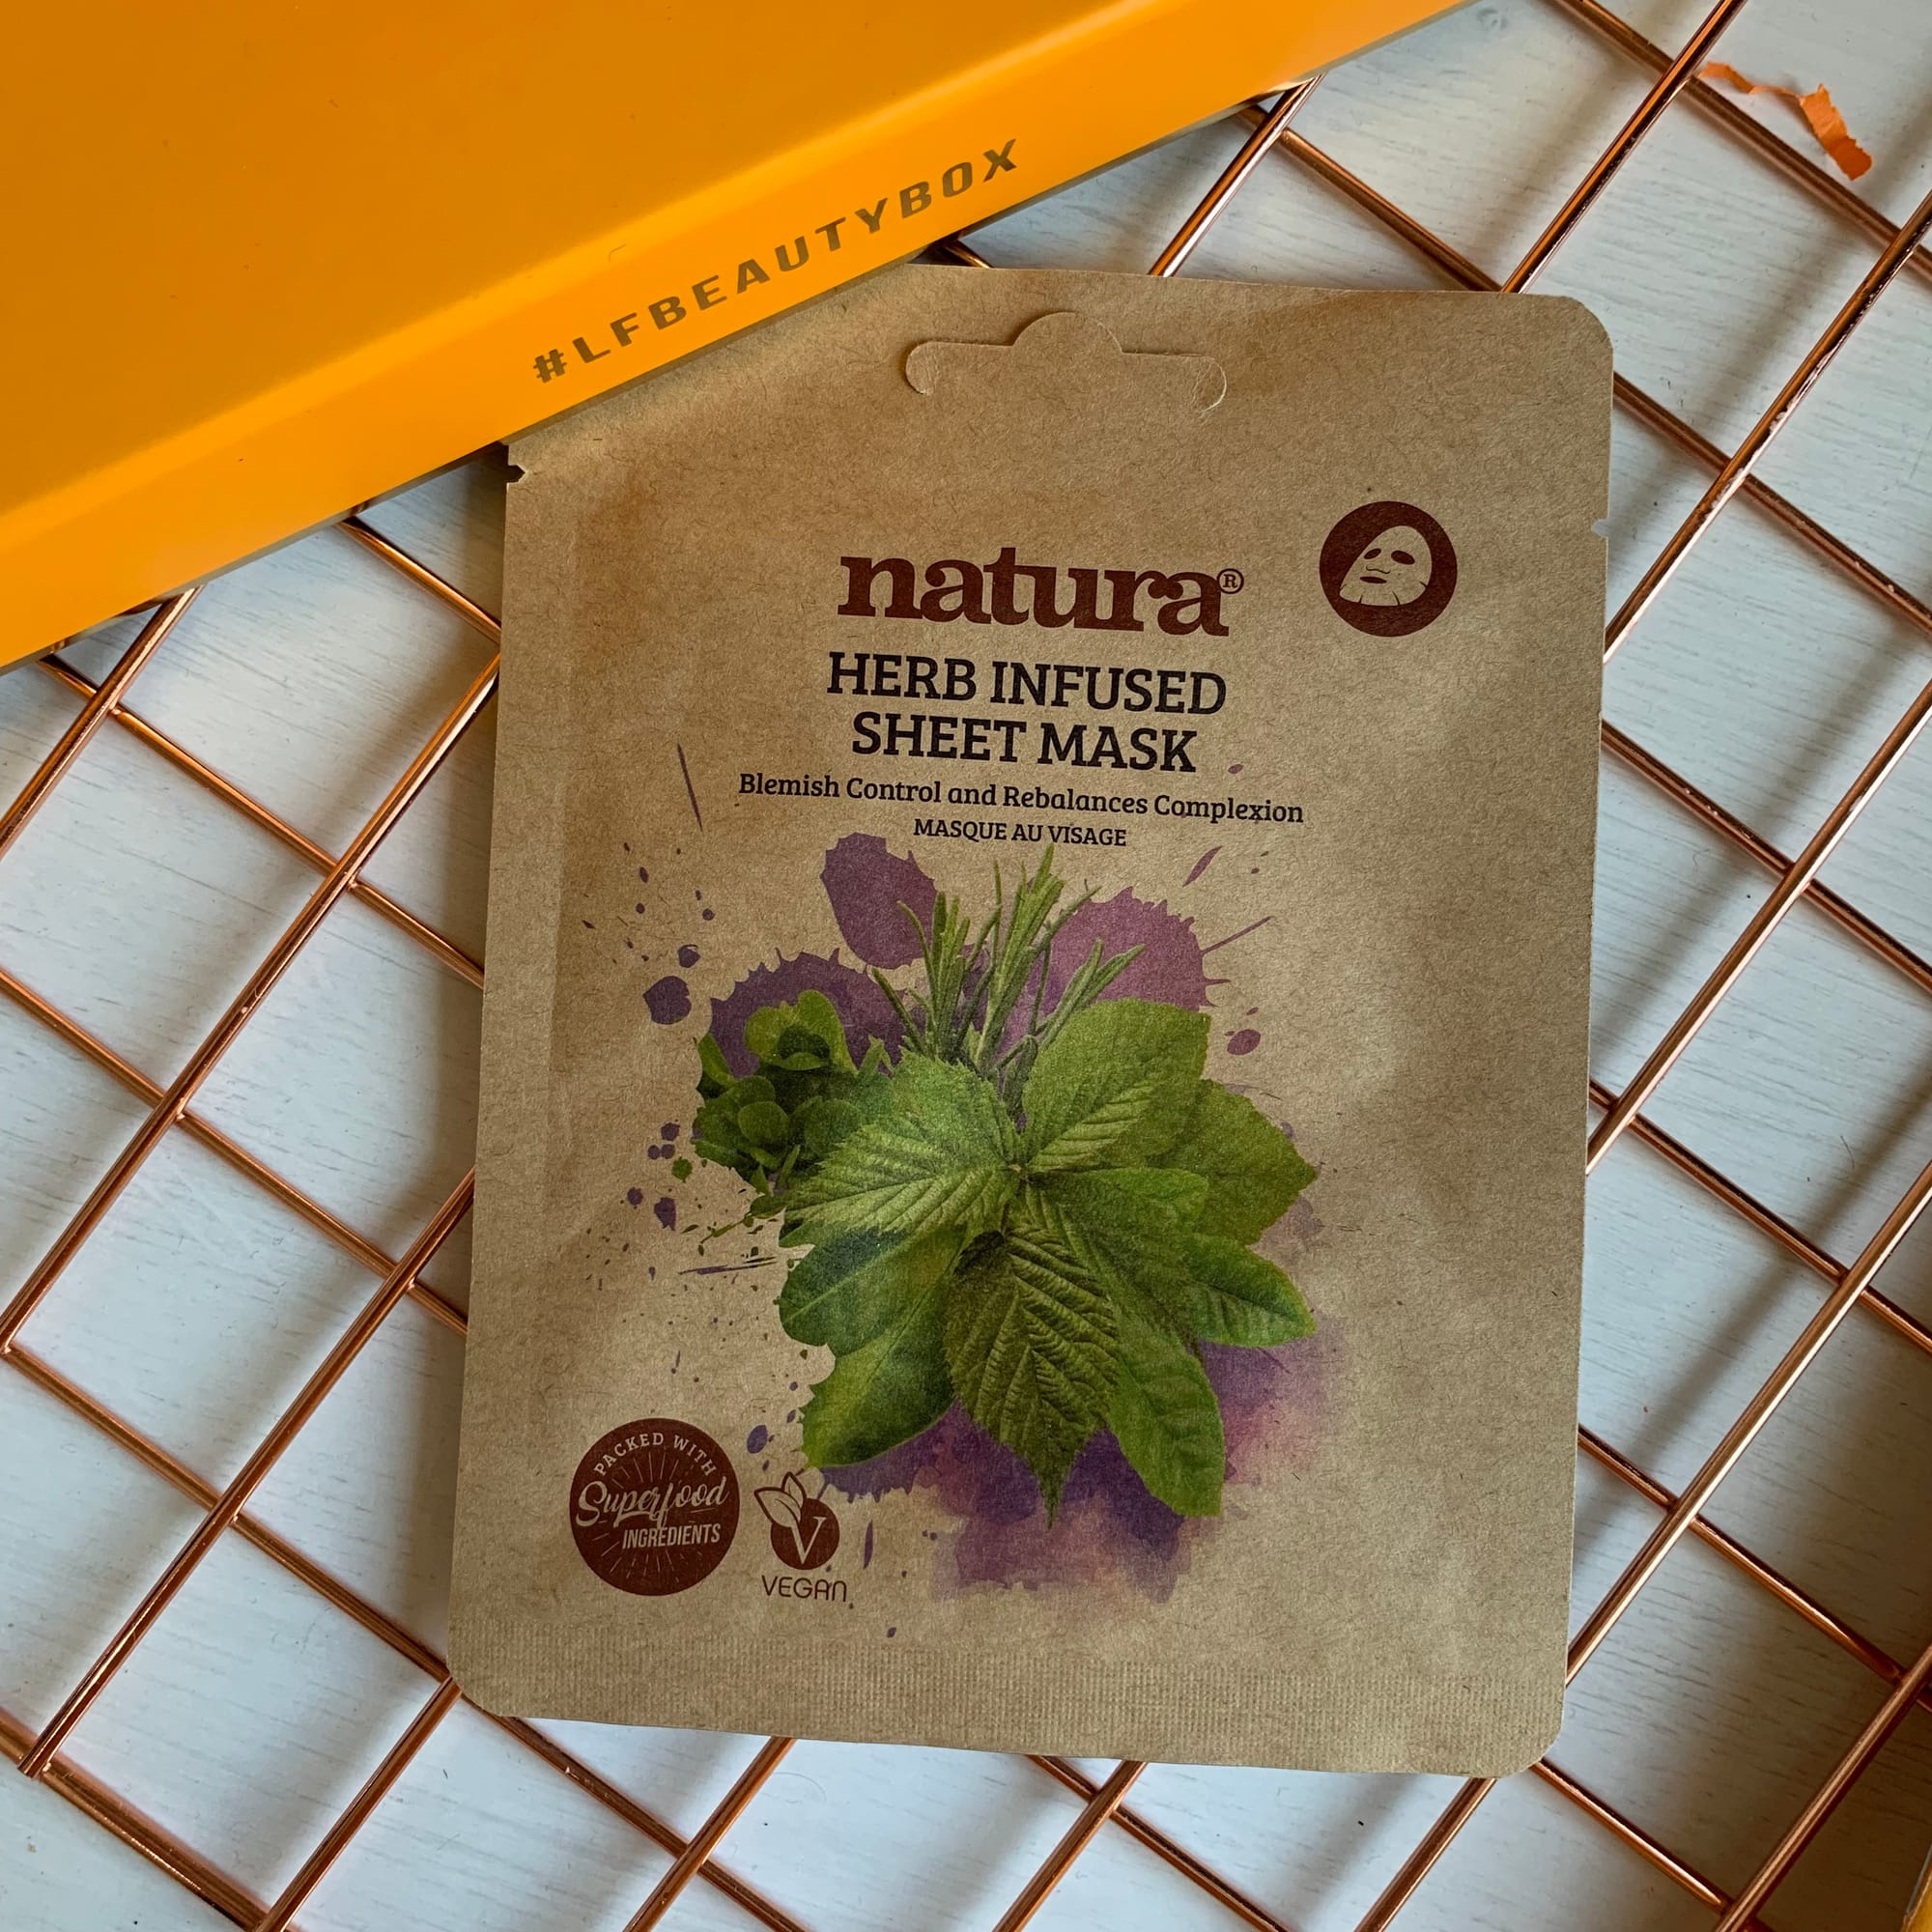 Natura Herb Infused Sheet Mask - Look Fantastic Beauty Box Review - August 2019 - Miss Boux